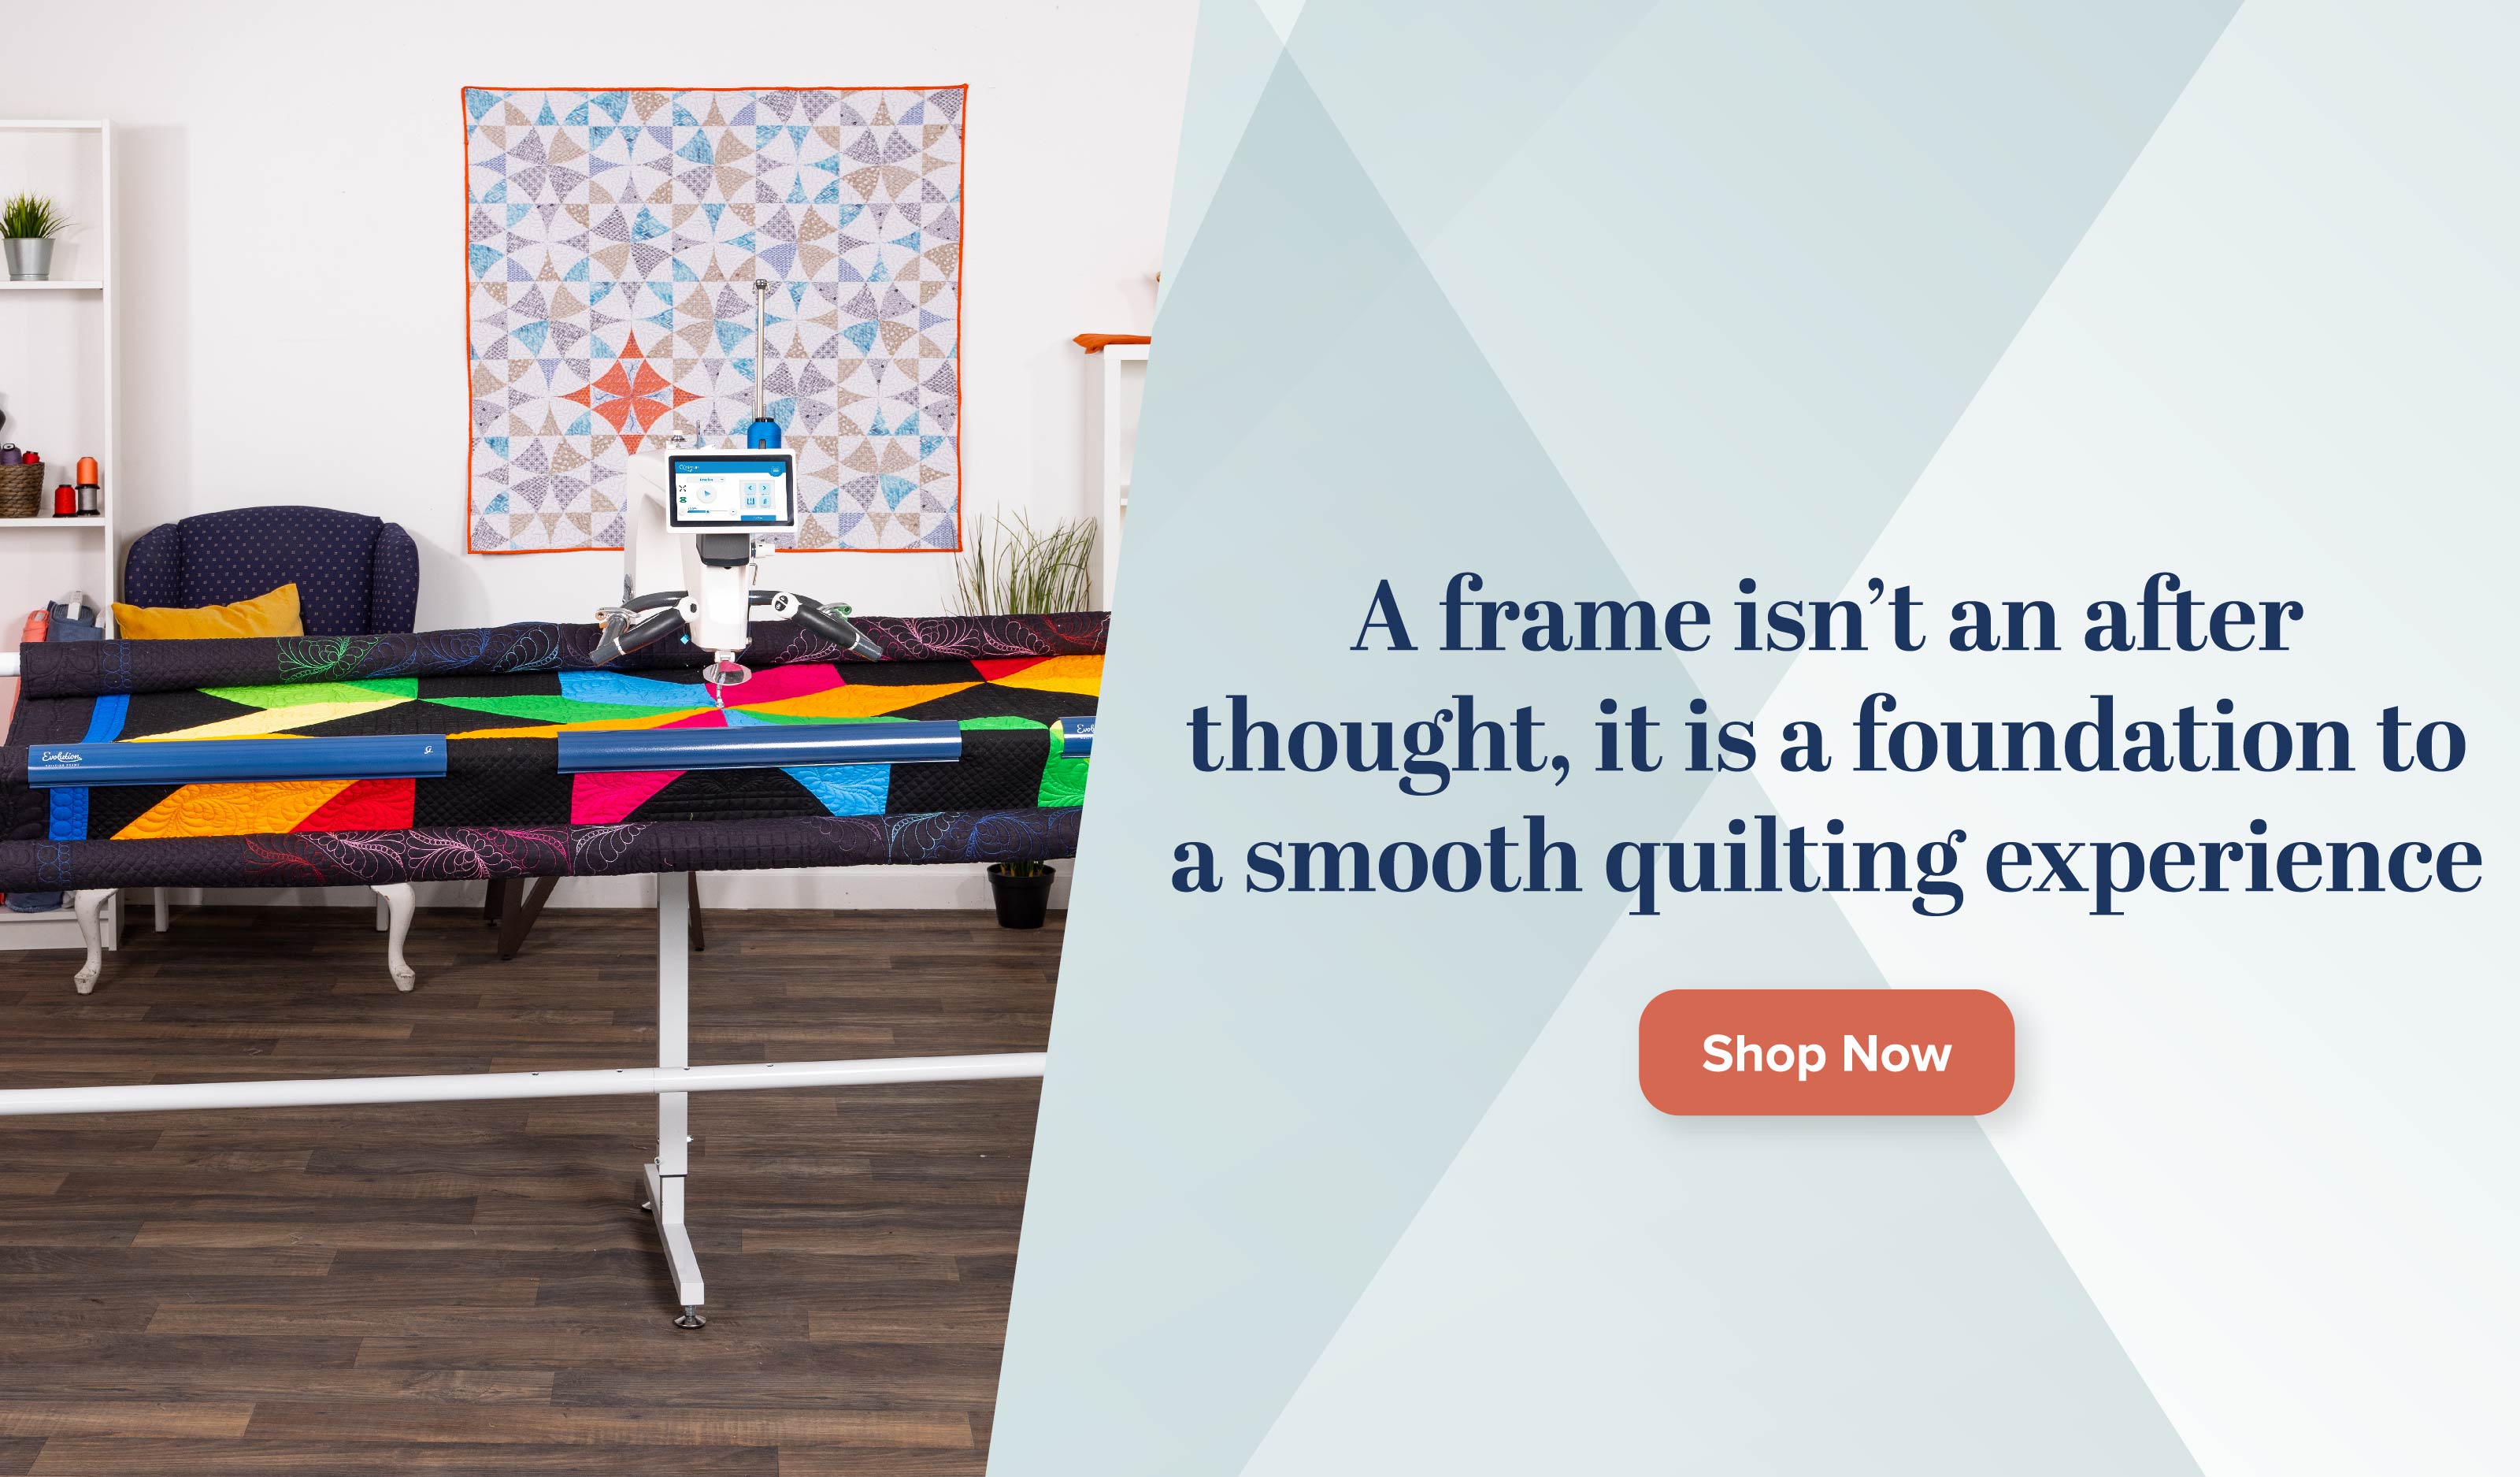 A frame isn't an afterthough, itis a foundation to a smooth quilting experience. Shop now.